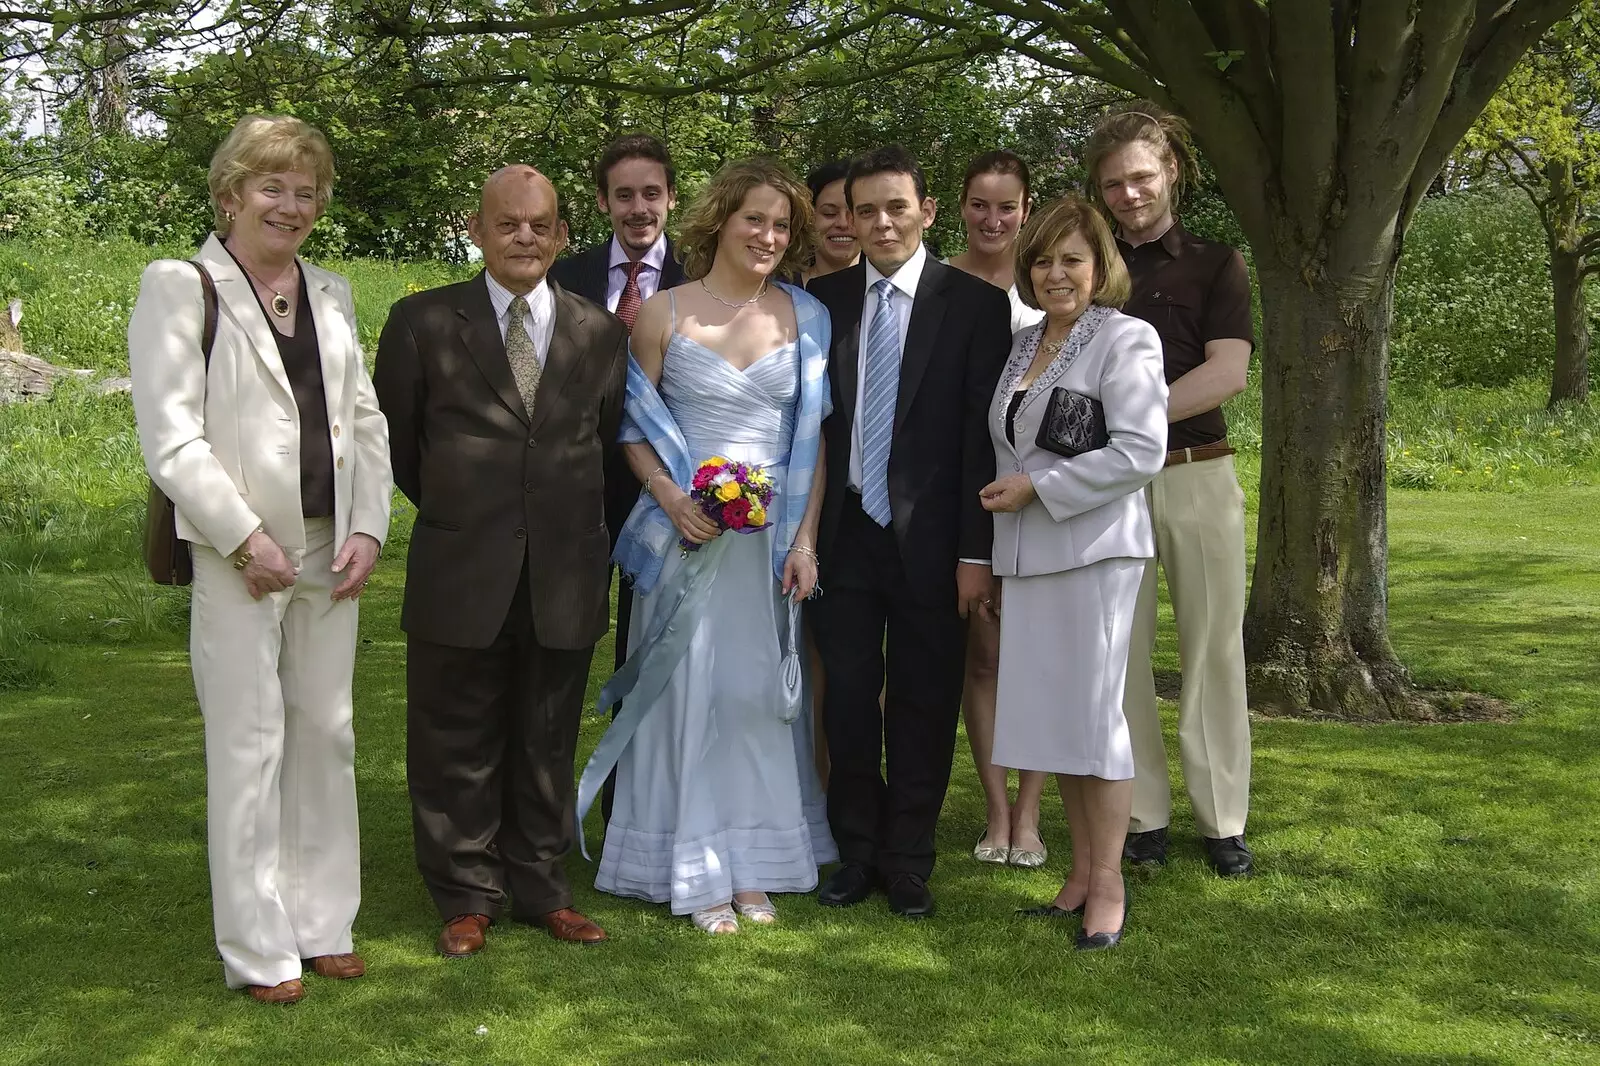 Family snapshot, from Hani and Anne's Wedding, County Hall, Cambridge - 2nd May 2008